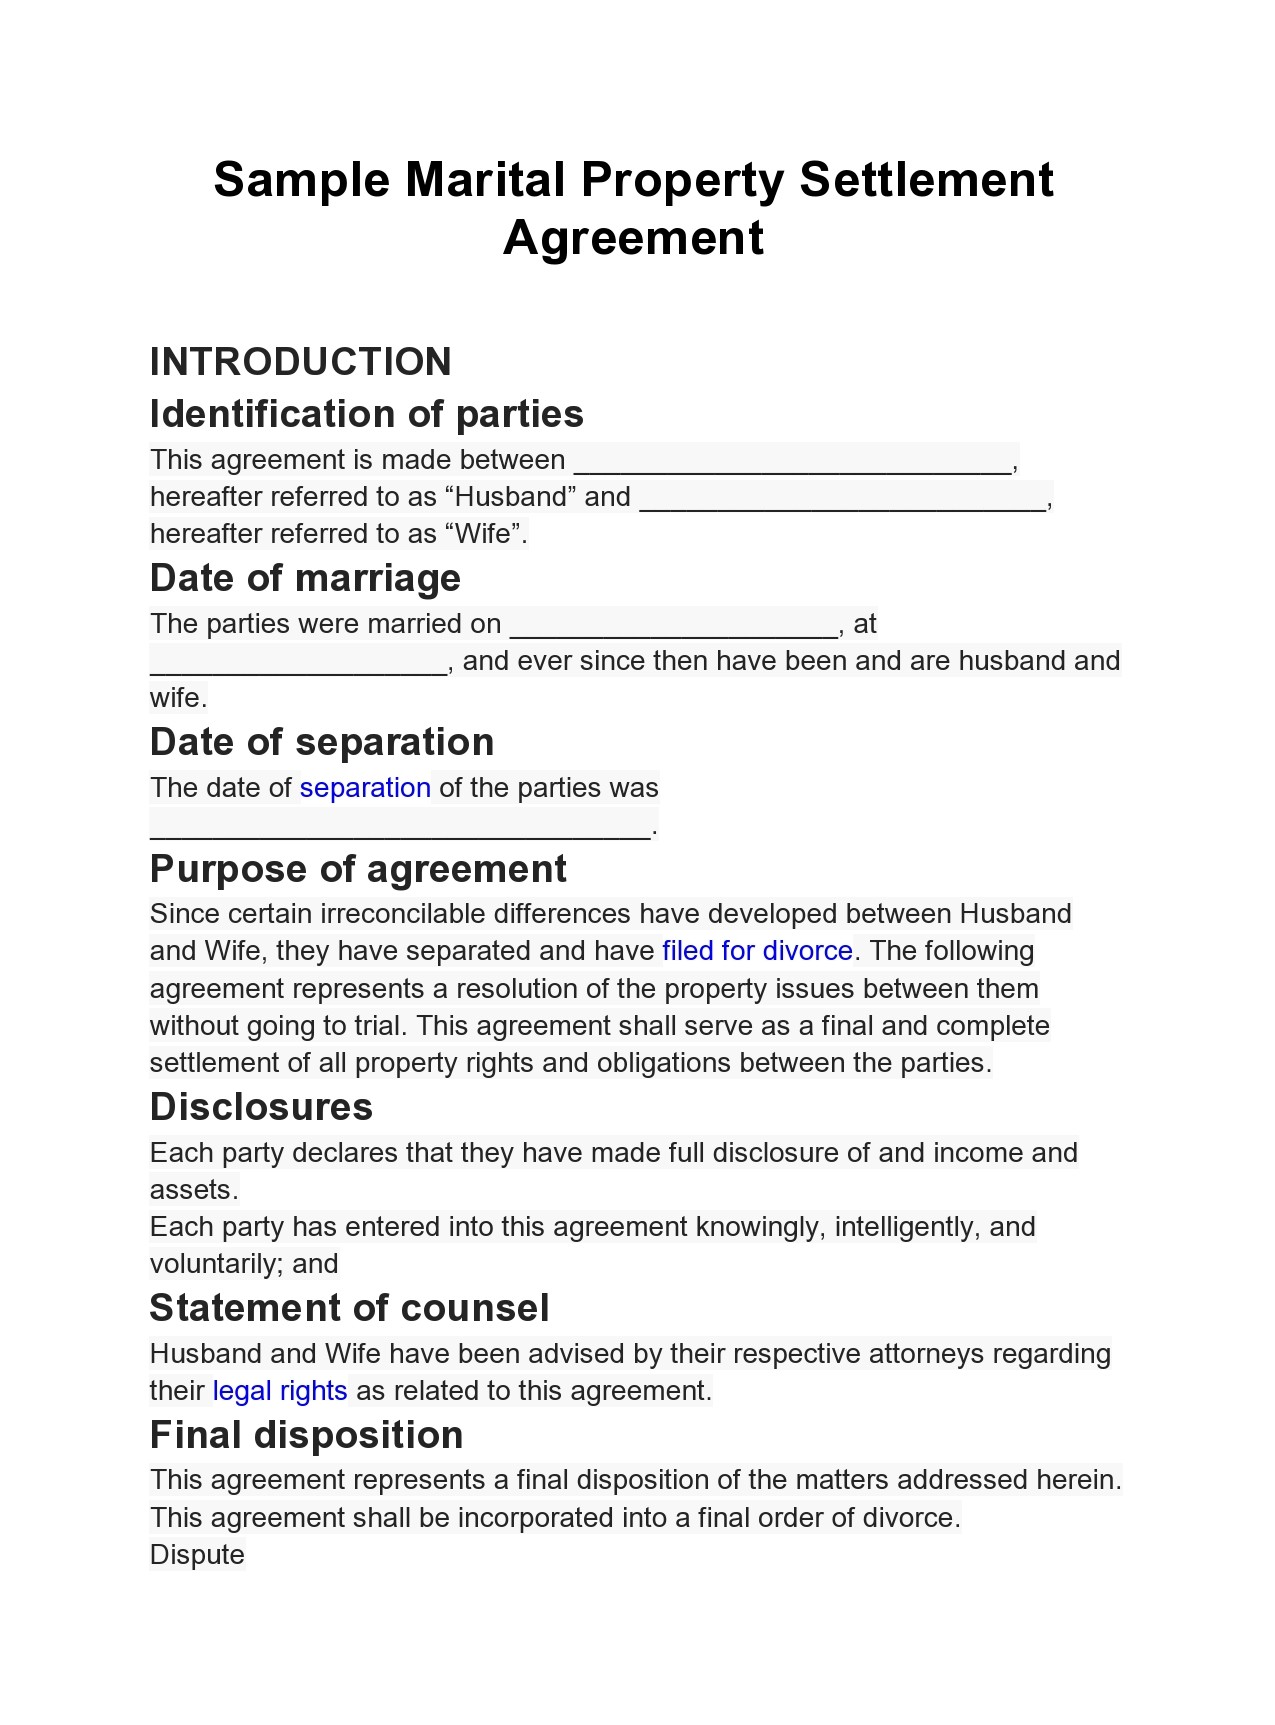 how-to-write-a-legal-settlement-agreement